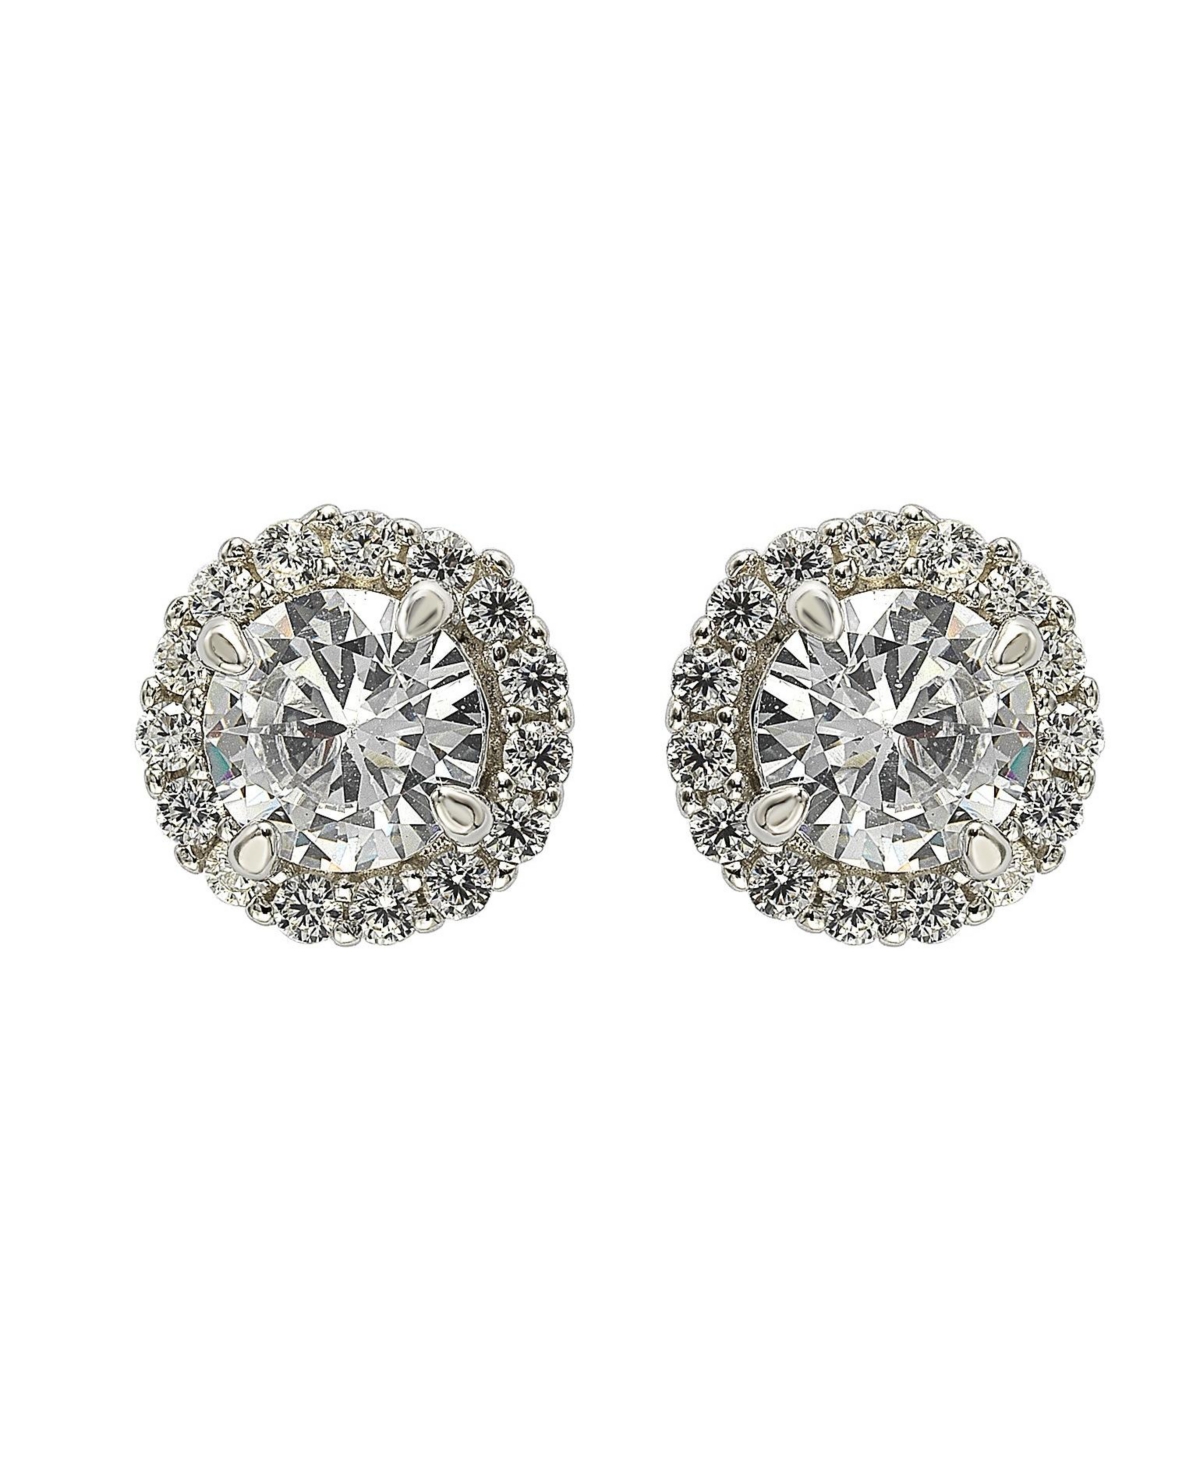 Suzy Levian Sterling Silver Cubic Zirconia Classic Round Halo Stud Earrings - White